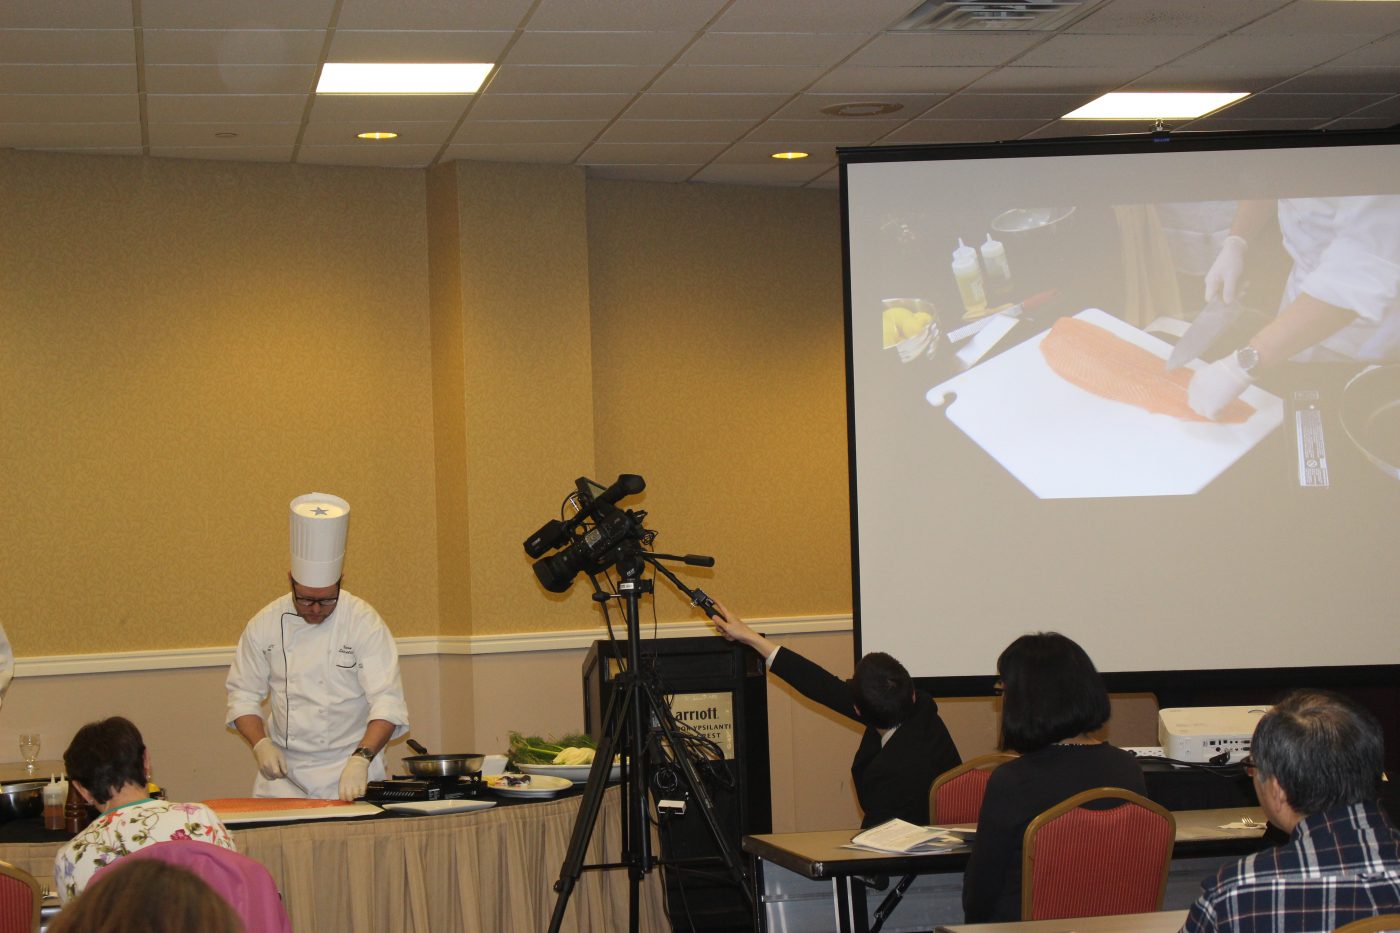 Chef Penn Cooking Demonstration